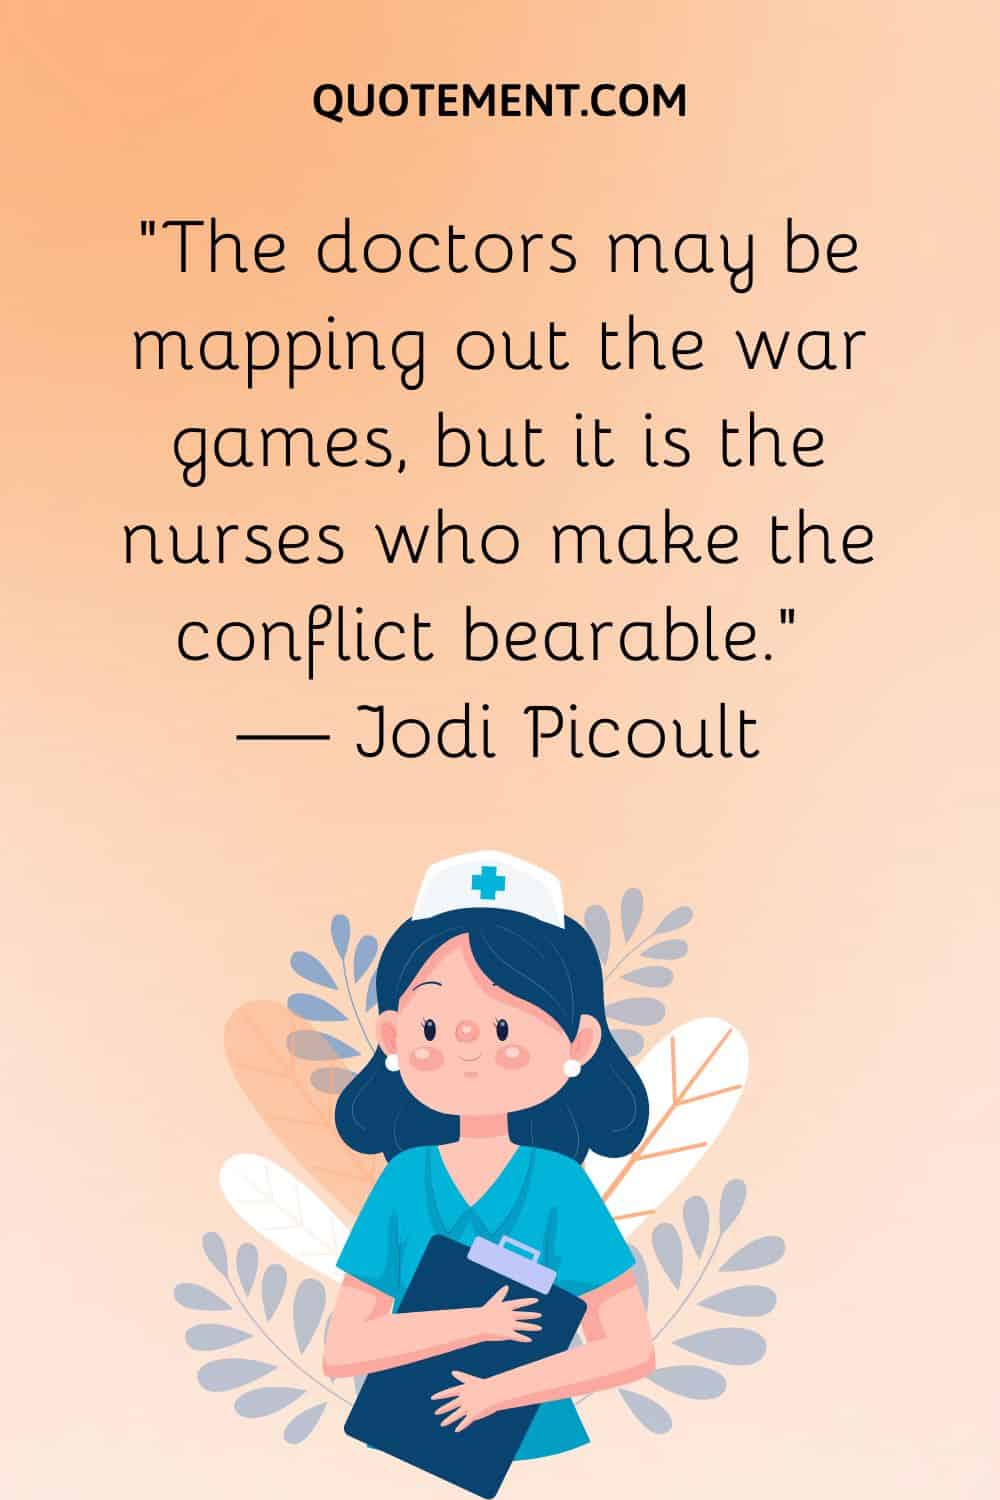 “The doctors may be mapping out the war games, but it is the nurses who make the conflict bearable.” — Jodi Picoult